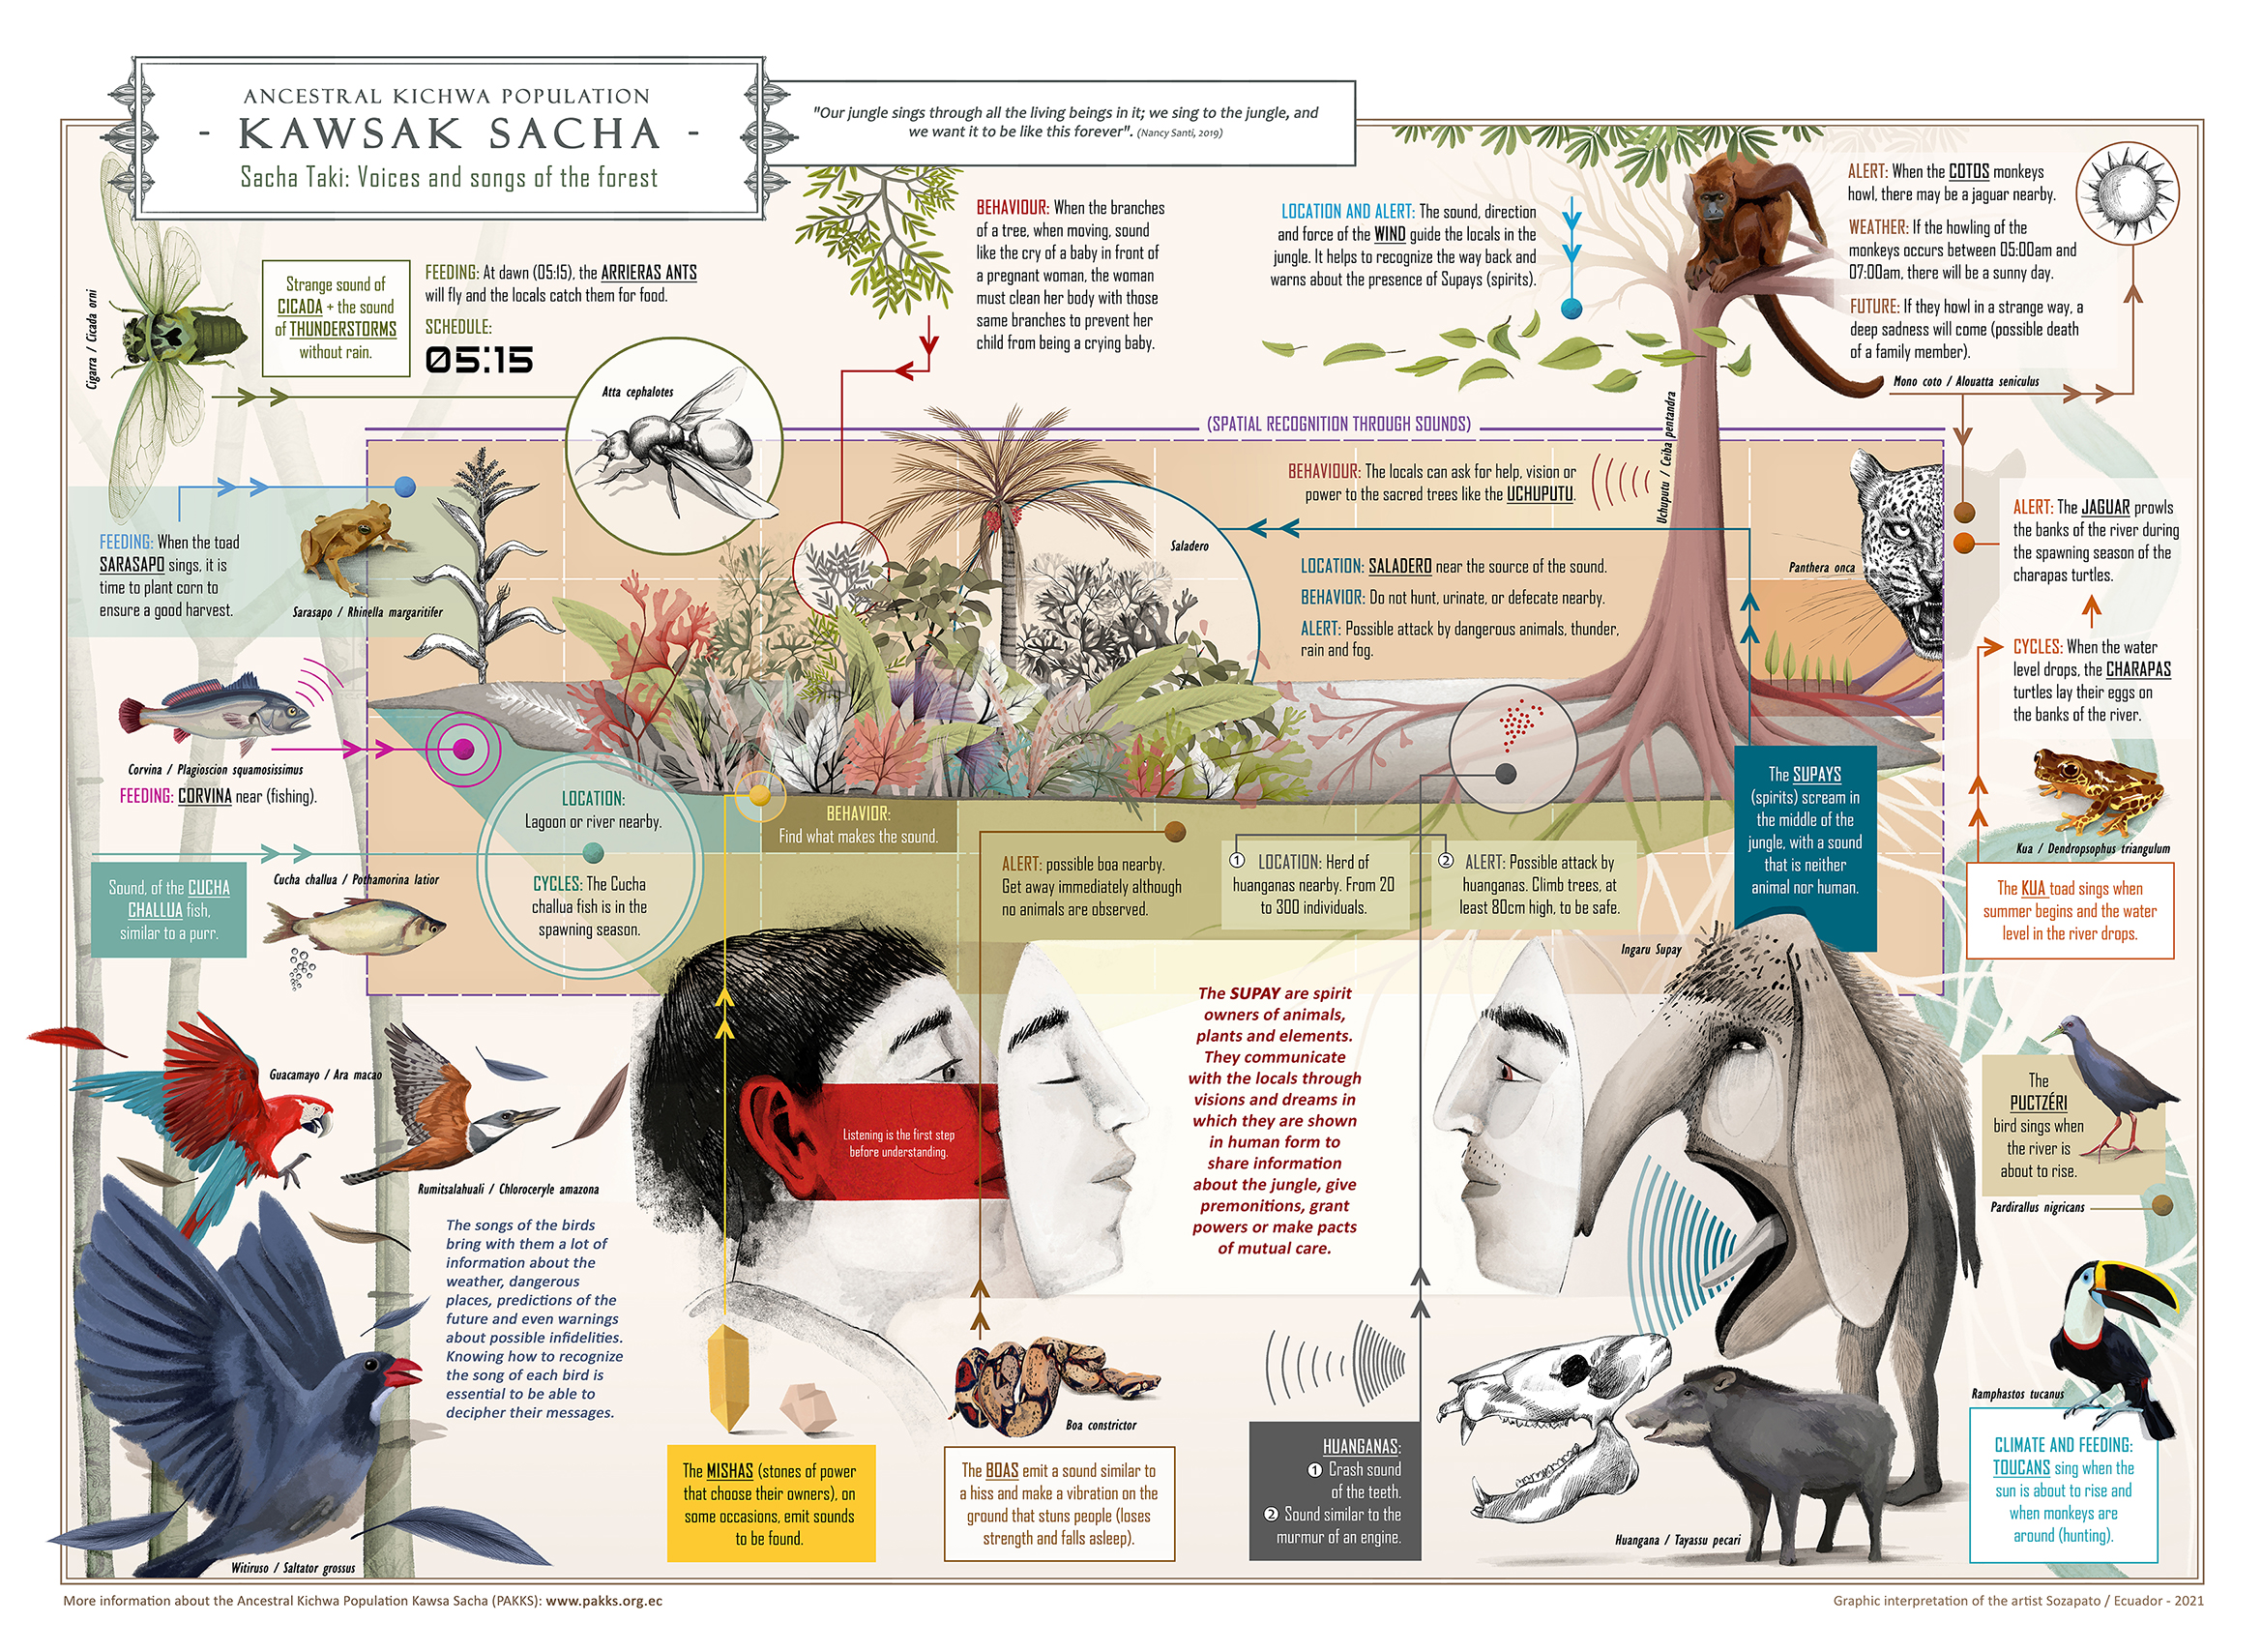 An illustration of Ecuadorian wildlife and people, with descriptions of local soundscapes and their connections to the ancestral Kichwa population